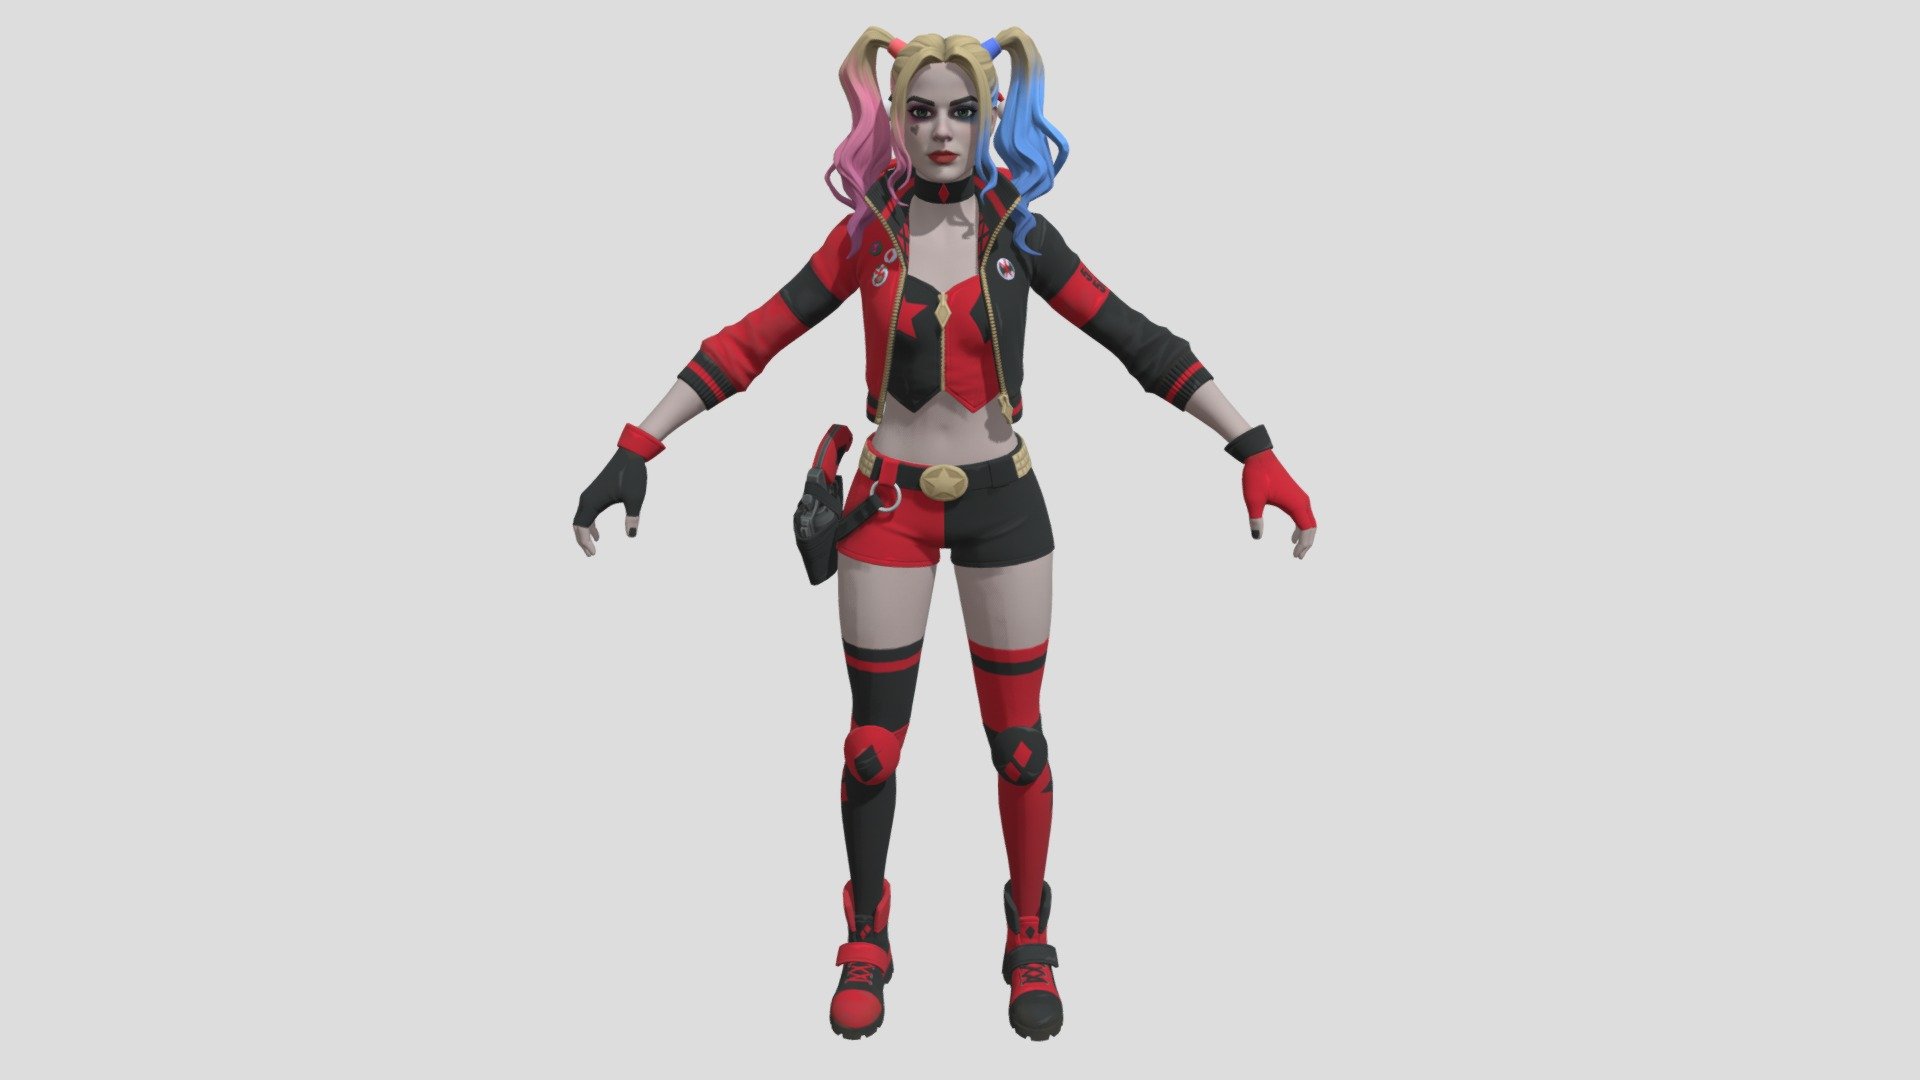 Fortnite: Harley Quinn V2 Original 3D Model by Epic Games from Fortnite free download for Unity and Unreal Engine!!!!!!!!!!!!!!!!!!

My Code Creator in Fortnite: TEAMEW - Fortnite: Harley Quinn V2 - Download Free 3D model by EWTube0 3d model